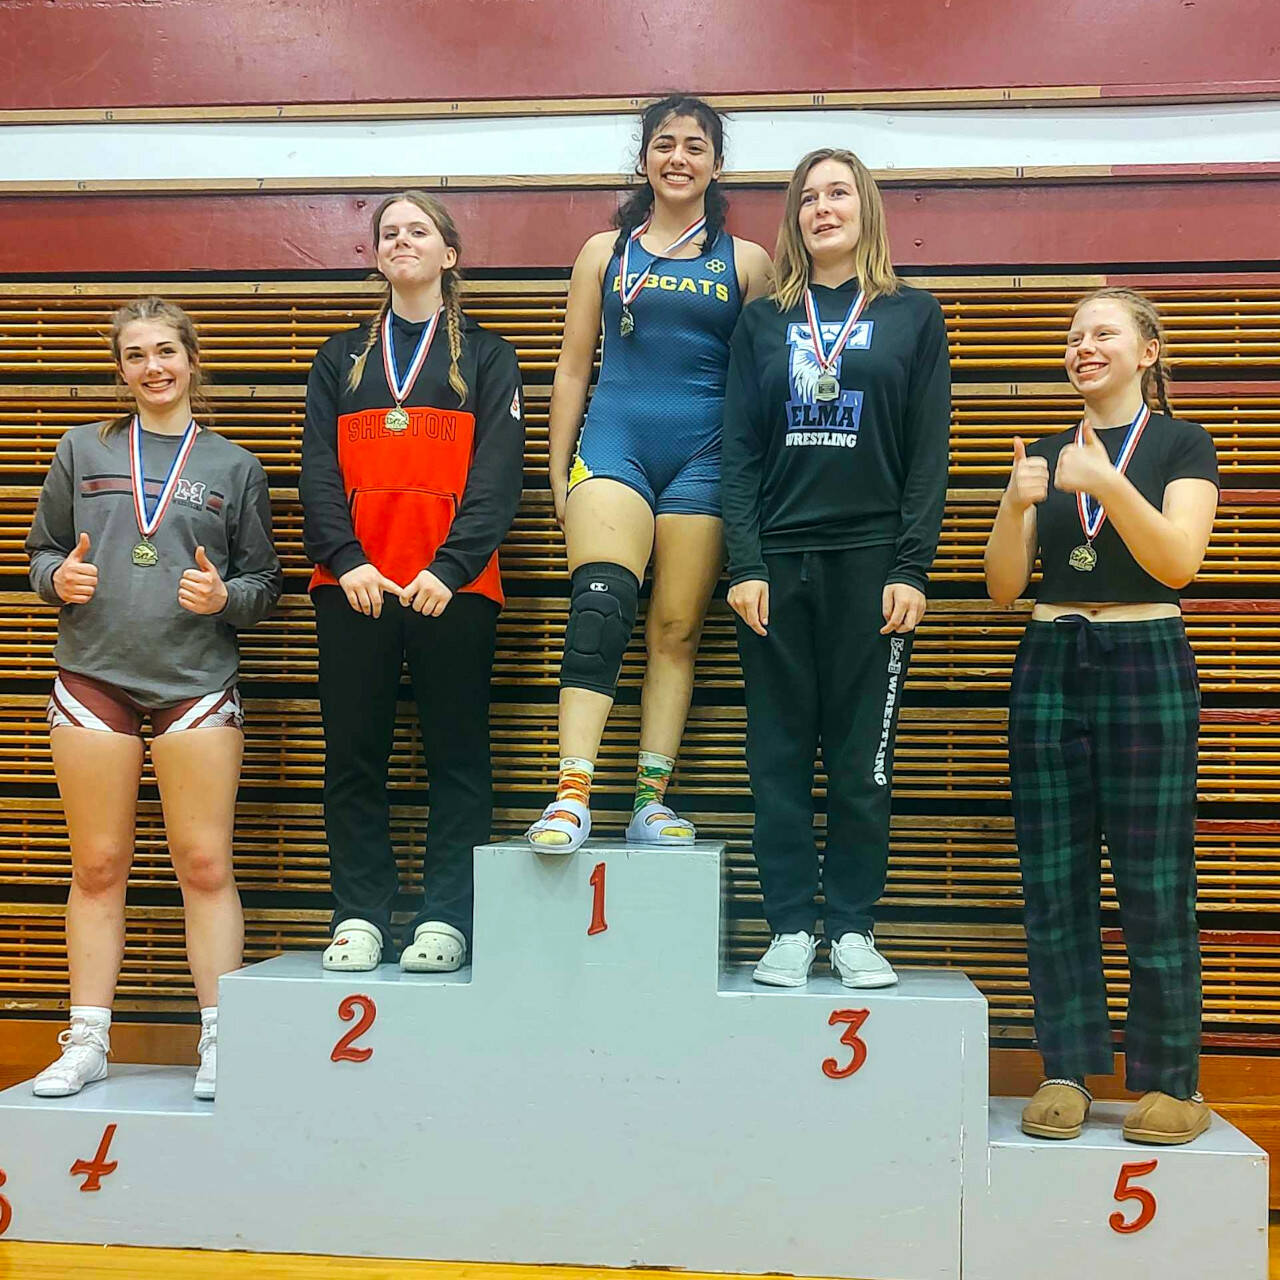 SUBMITTED PHOTO Aberdeen’s Peityn Munoz stands atop the podium after winning the 140-pound weight class at the WIAA District 4 Girls North 1B/2B/1A/2A Sub-Regional meet on Saturday at Hoquiam High School. Elma’s Taylor Nesmith (3) and Montesano’s Emma Peterson (4) are also pictured.